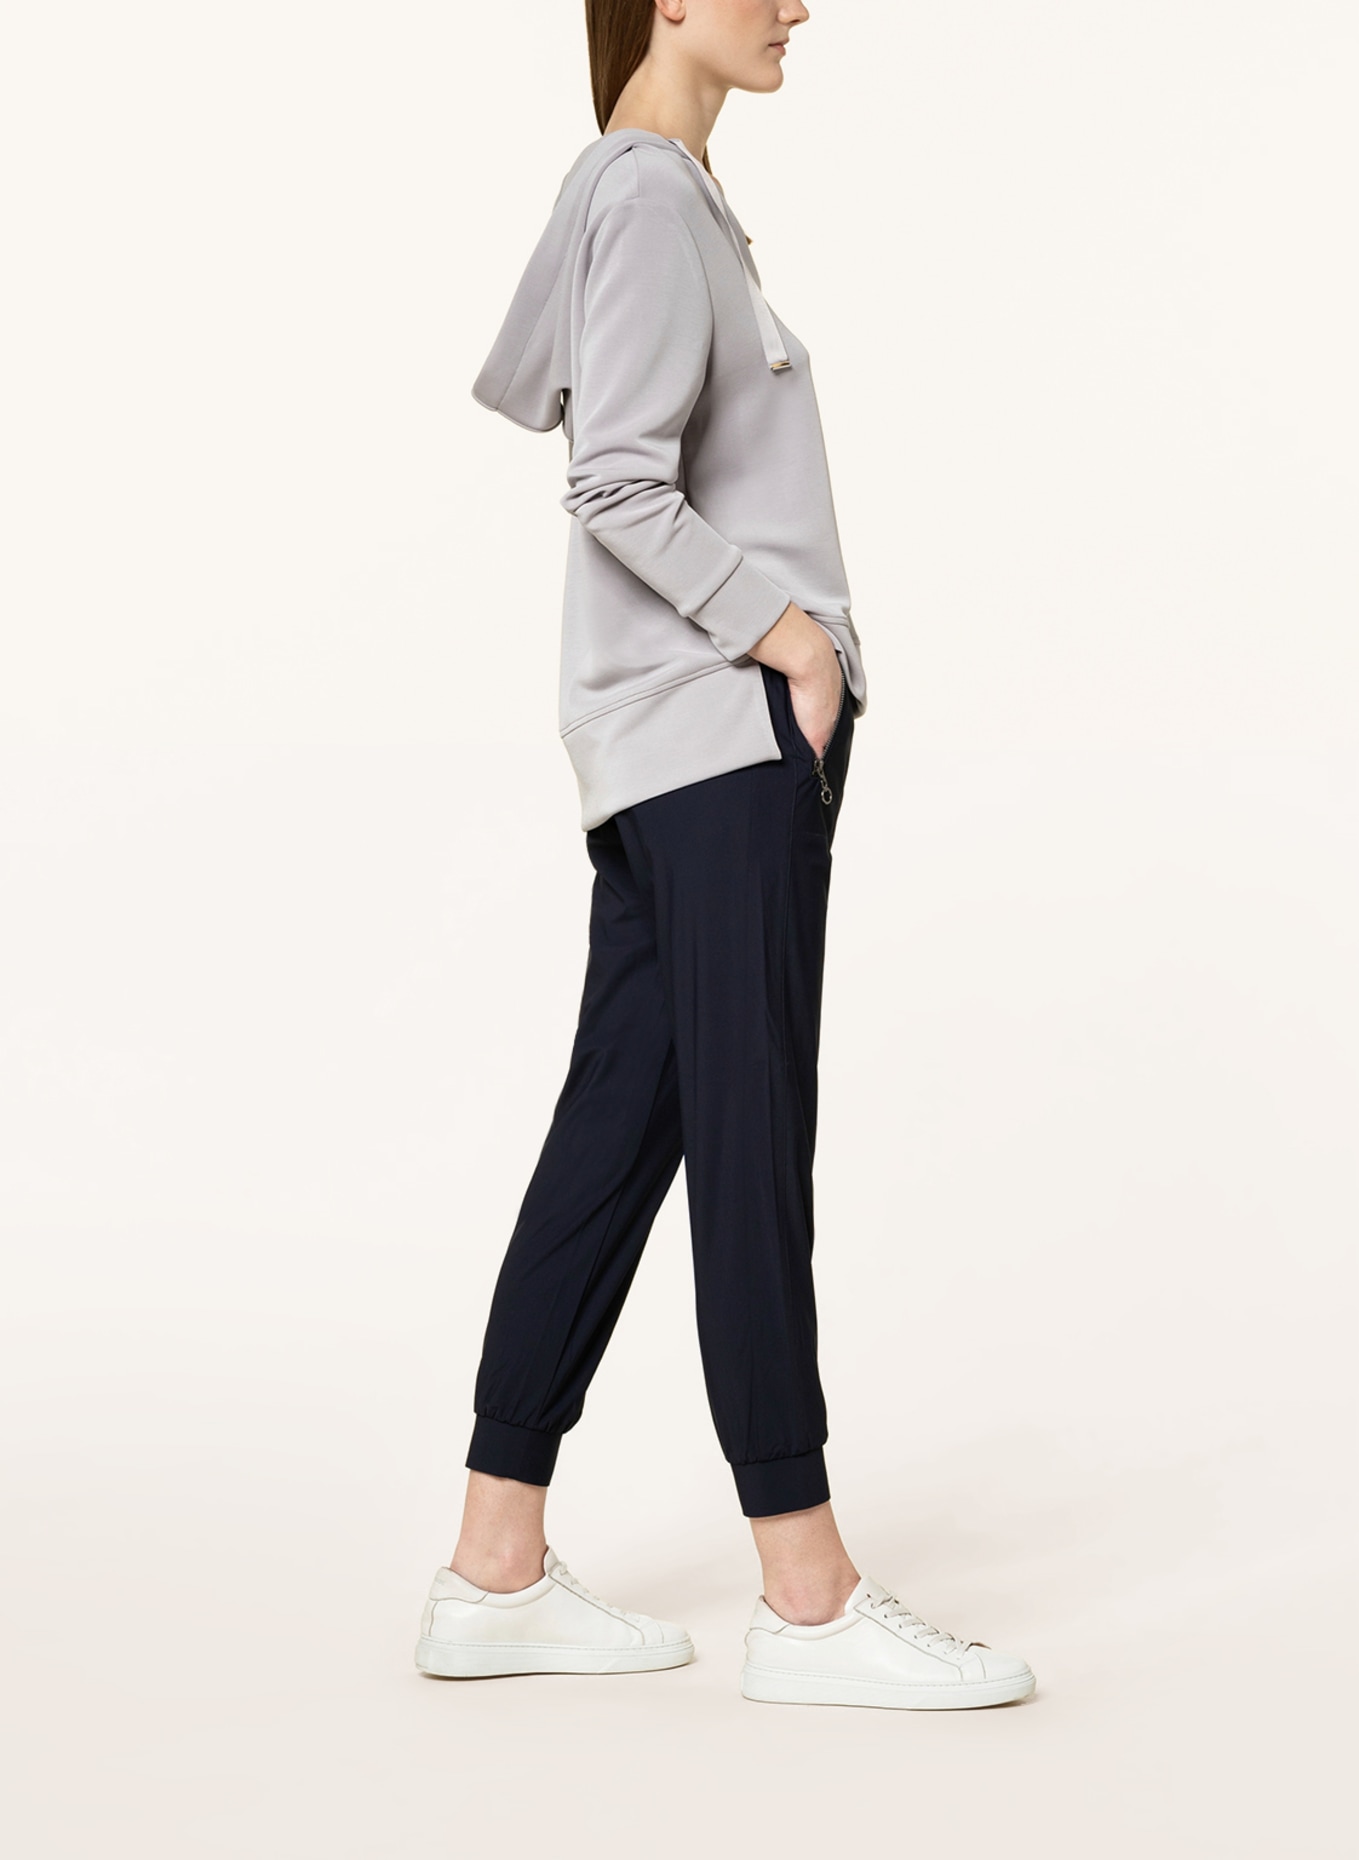 s.Oliver BLACK LABEL Trousers in jogger style, Color: DARK BLUE (Image 4)